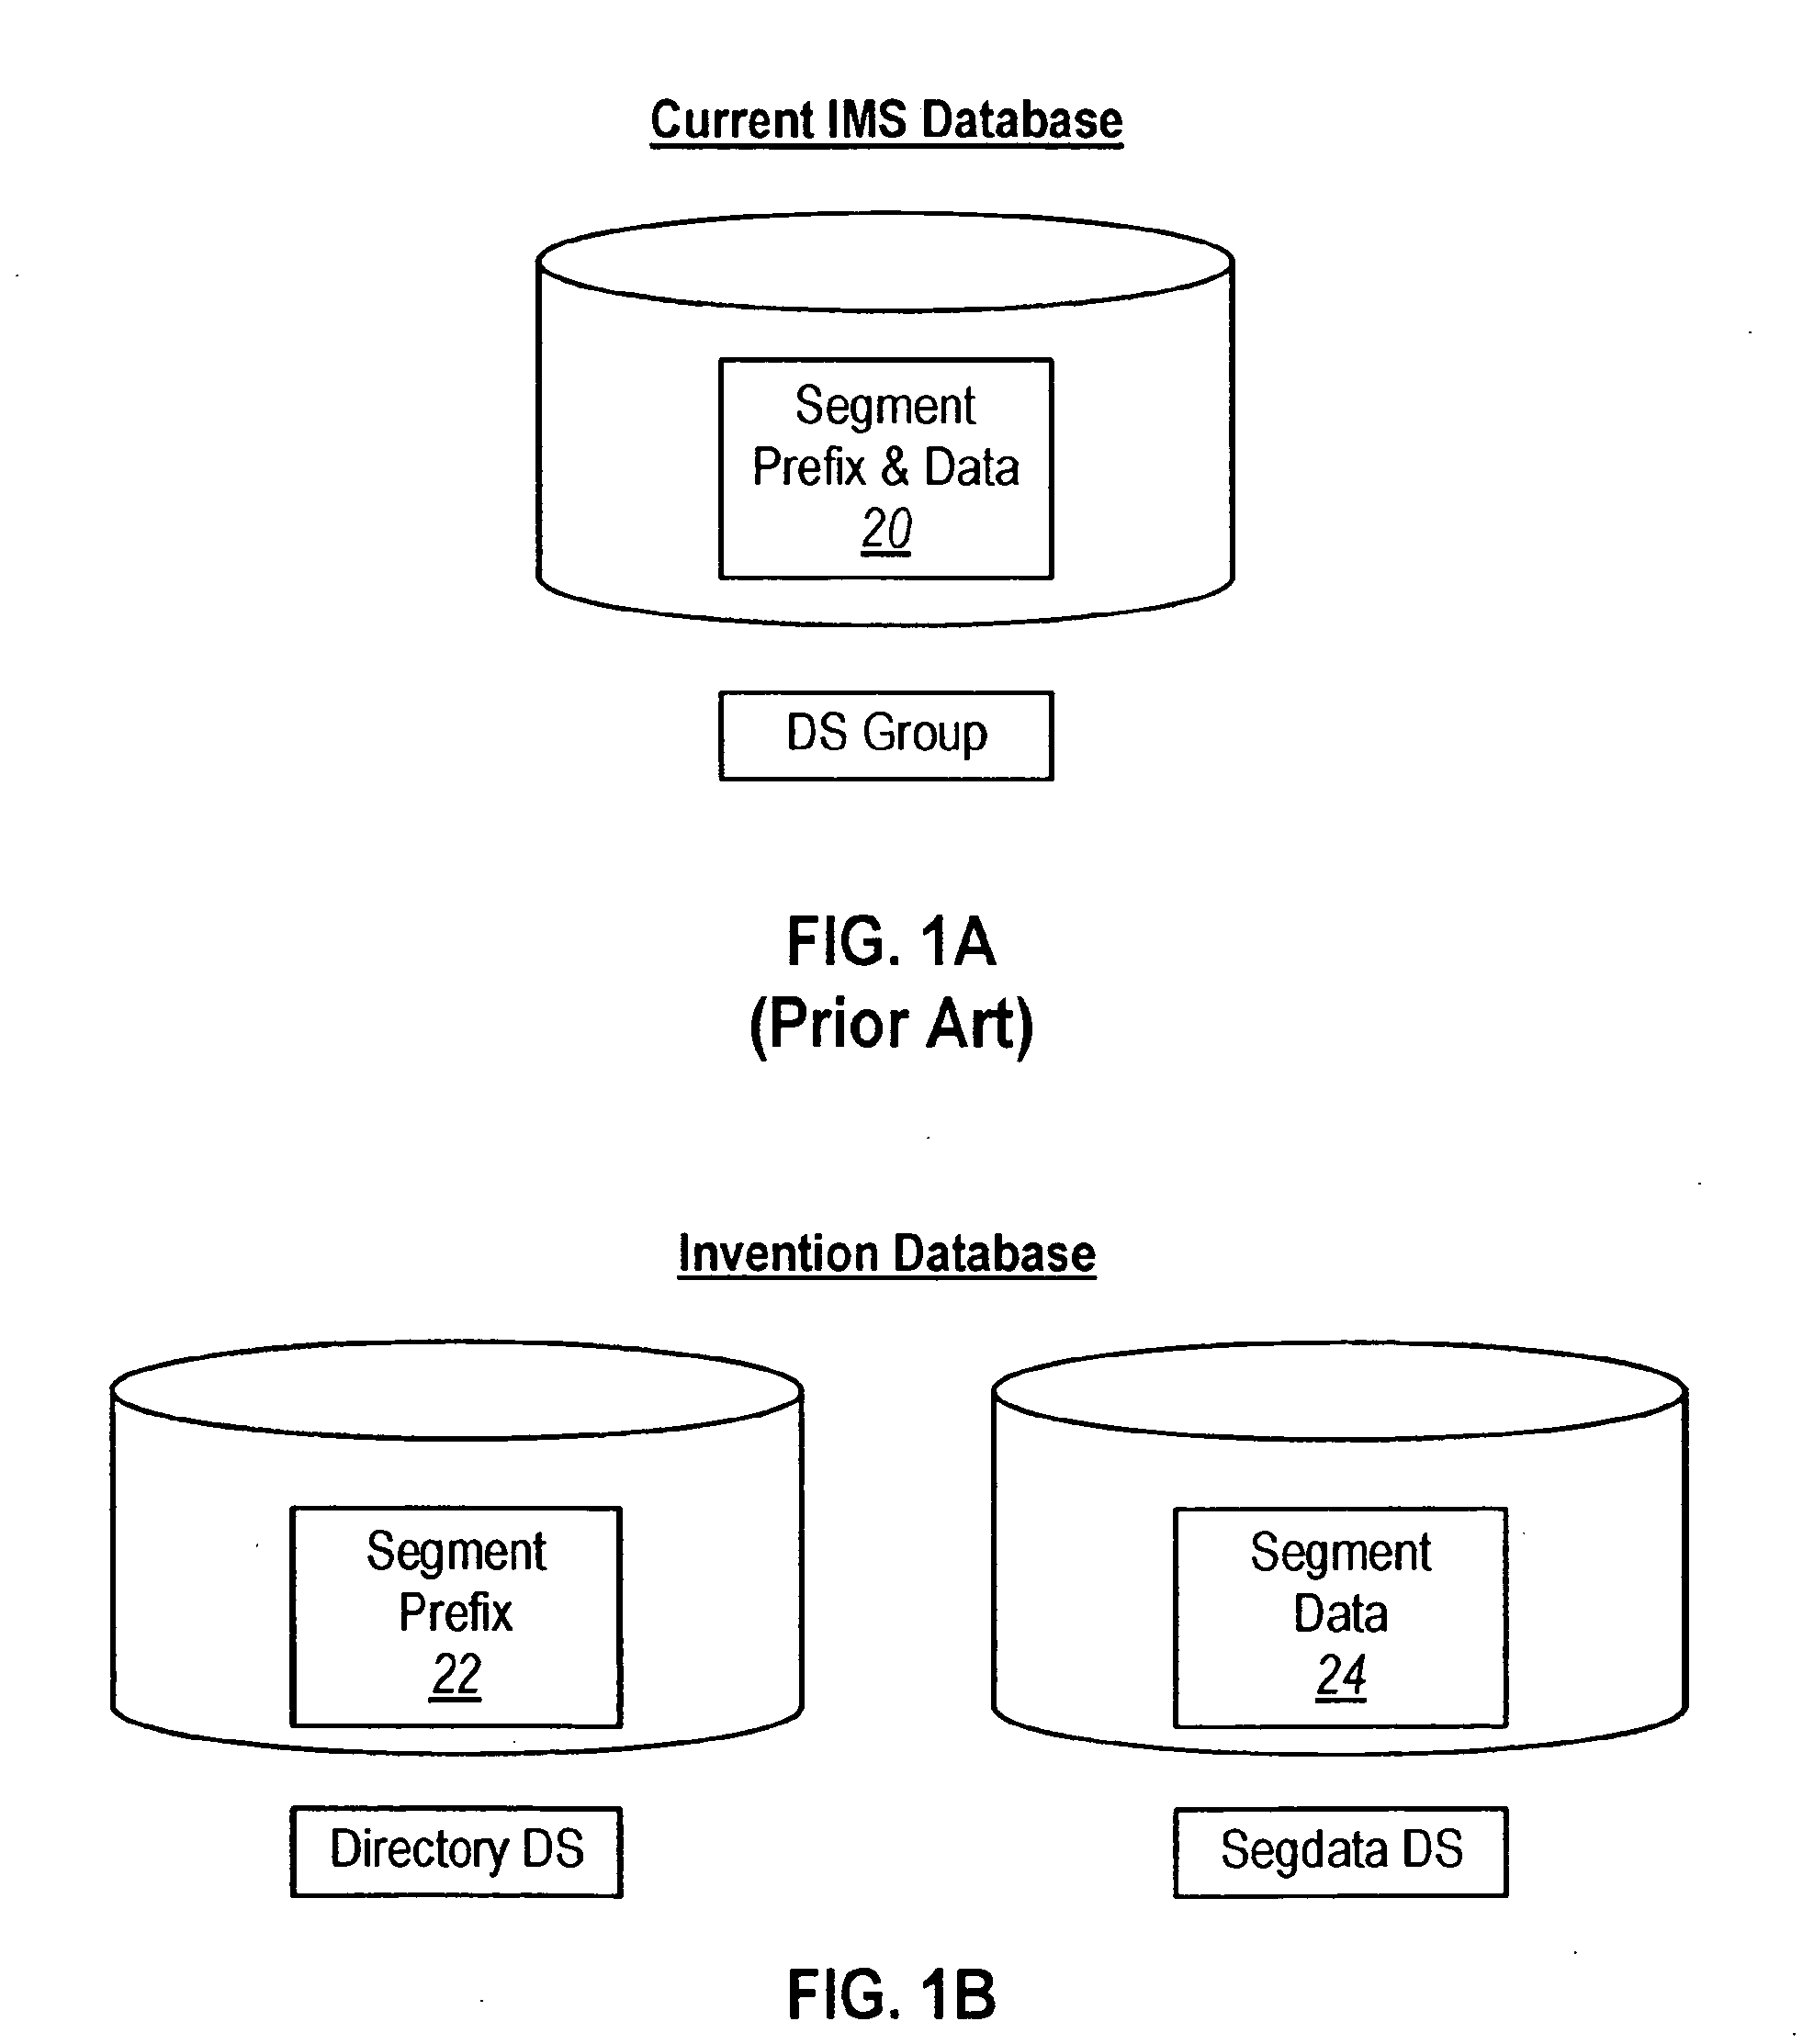 Space management of an IMS database